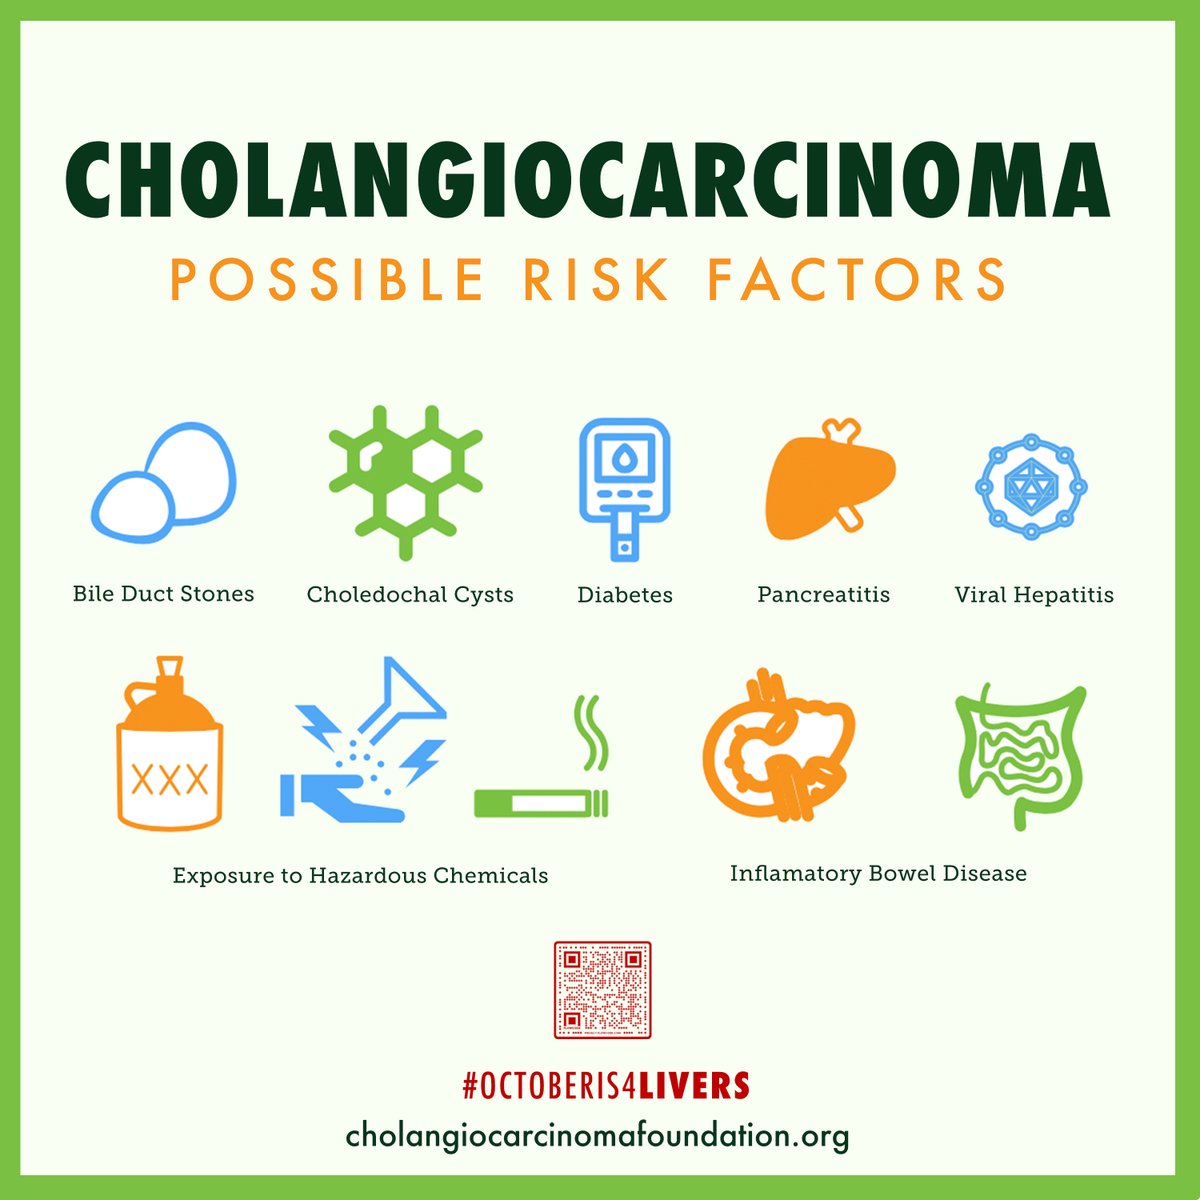 October is #LiverCancerAwarenessMonth! All month long, we’ll be sharing resources to help spread awareness of #cholangiocarcinoma, the second most common primary liver cancer worldwide 🌍.  

Looking for more info? Head this way ➡️cholangiocarcinoma.org/risk-factors/